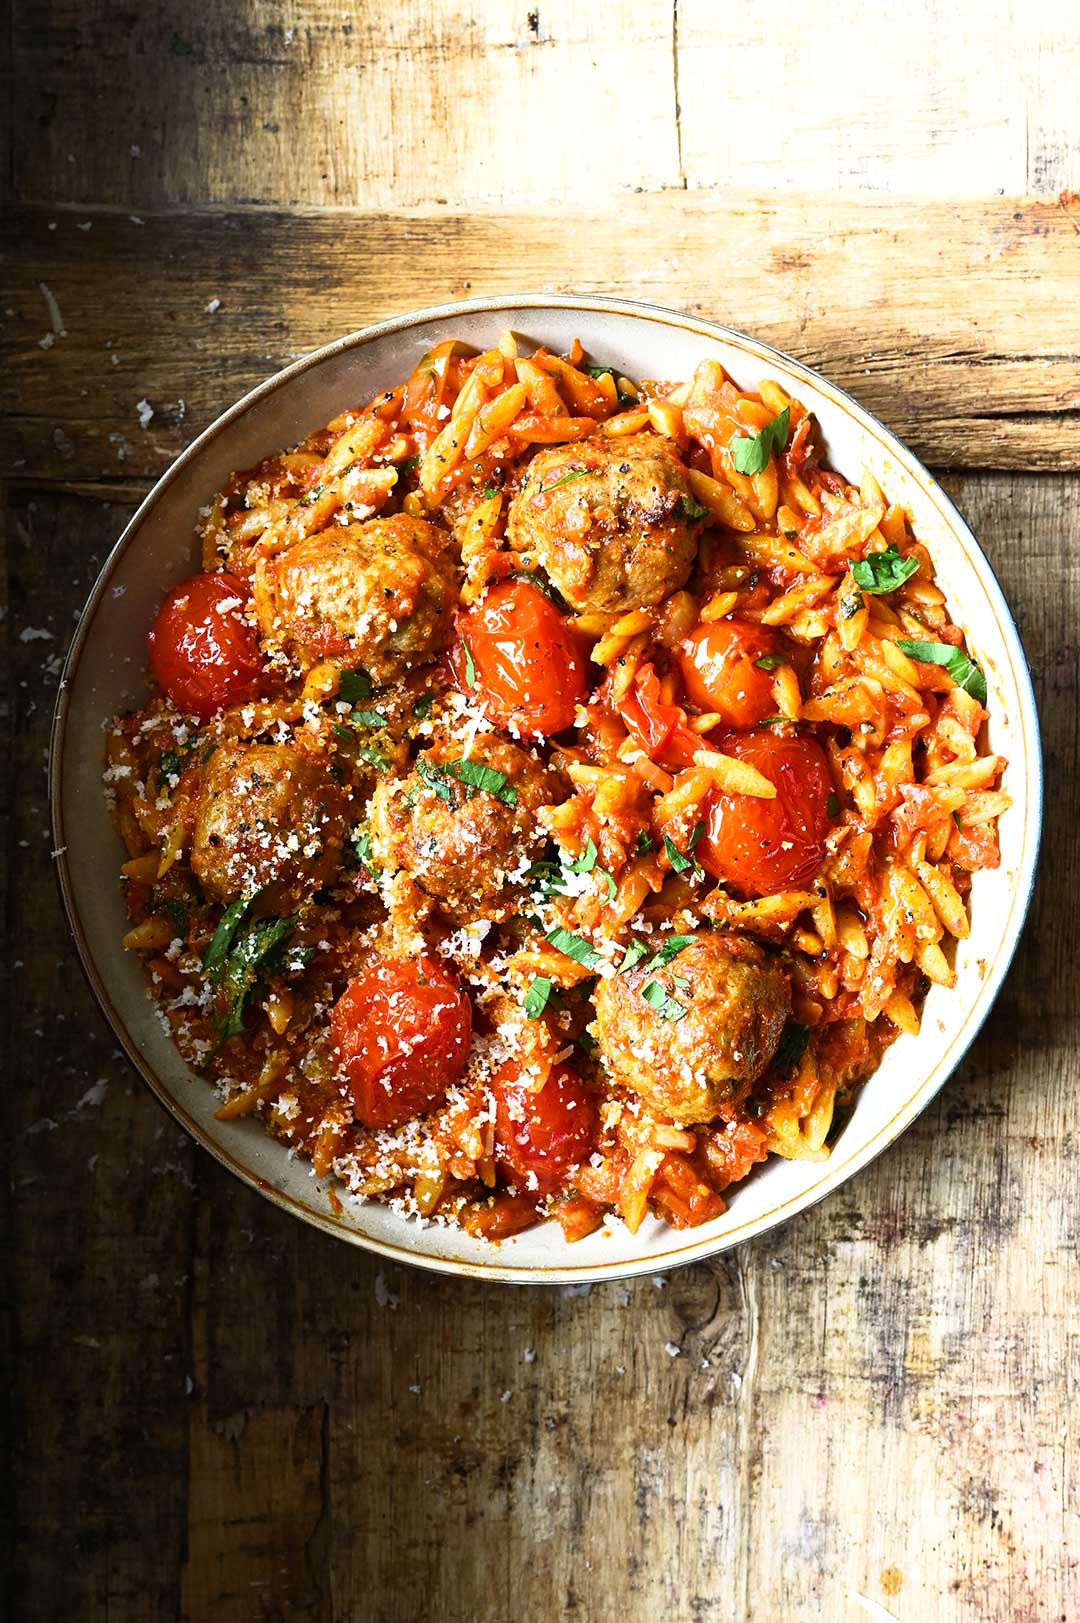 serving dumplings | Meatballs in tomato sauce with orzo